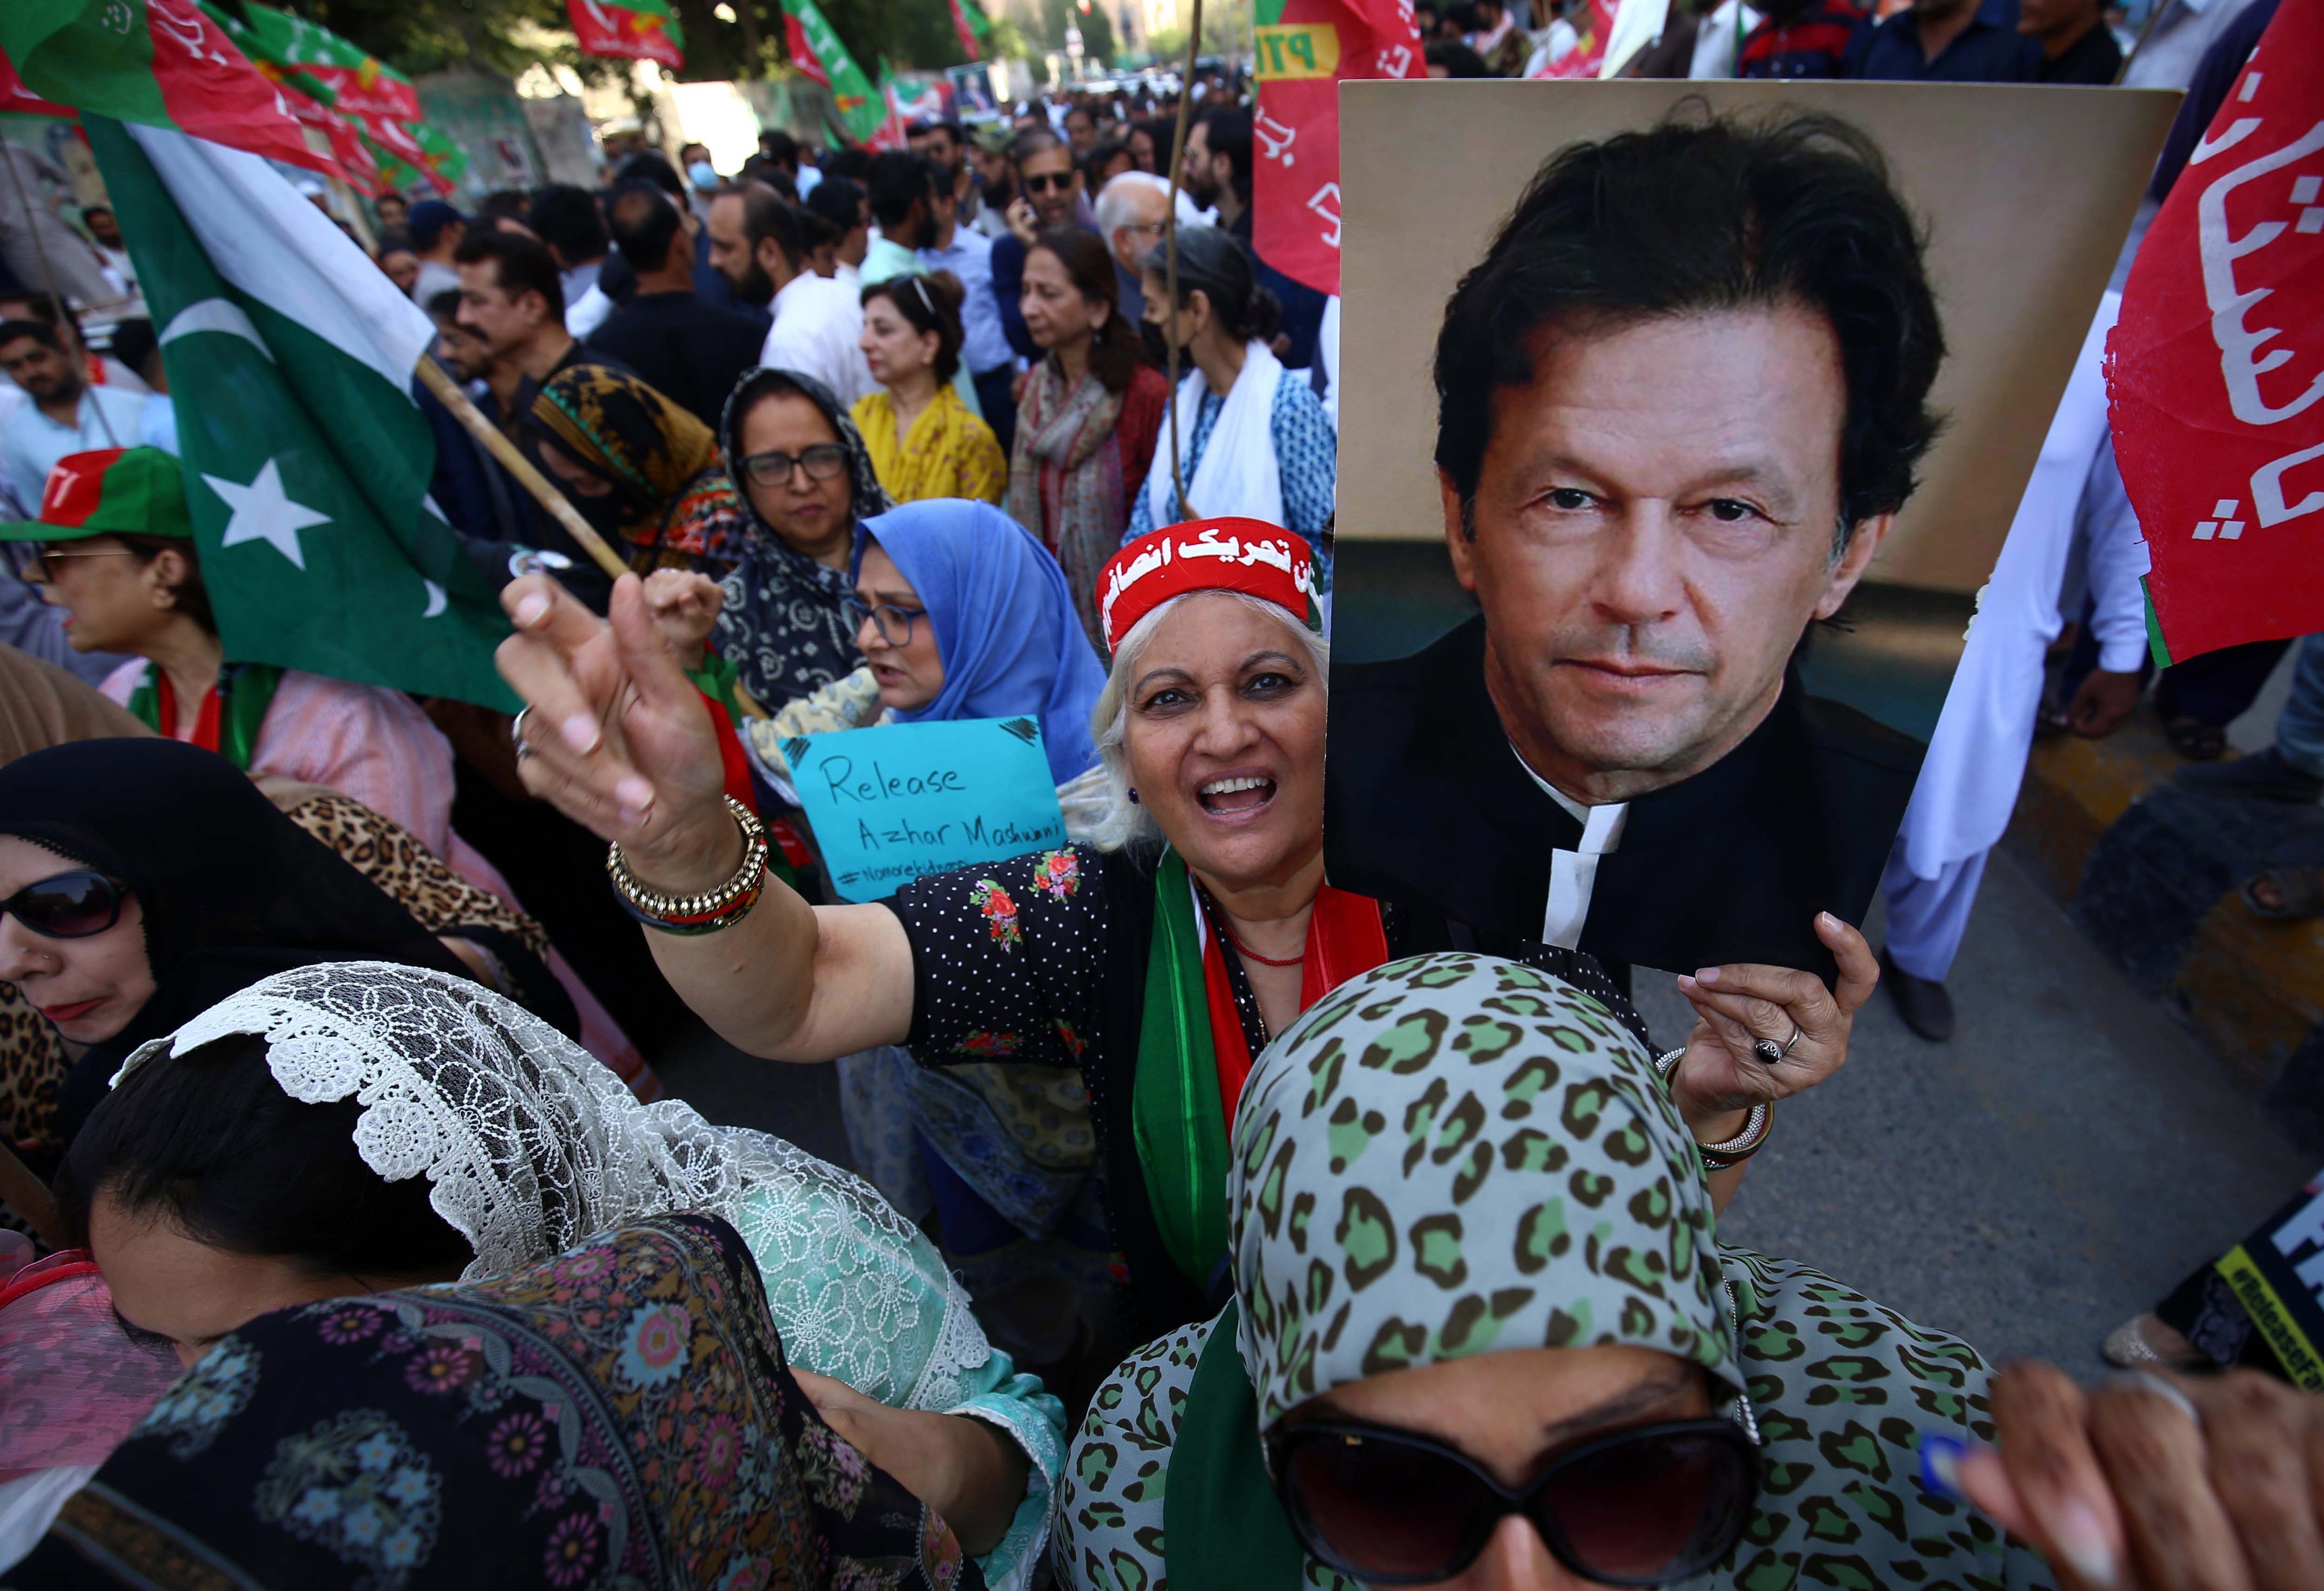 A supporter of opposition party Pakistan Tehreek-e-Insaf (PTI) holds a poster of its chairman Imran Khan, the nation’s former leader, during a rally in March. Photo: EPA-EFE